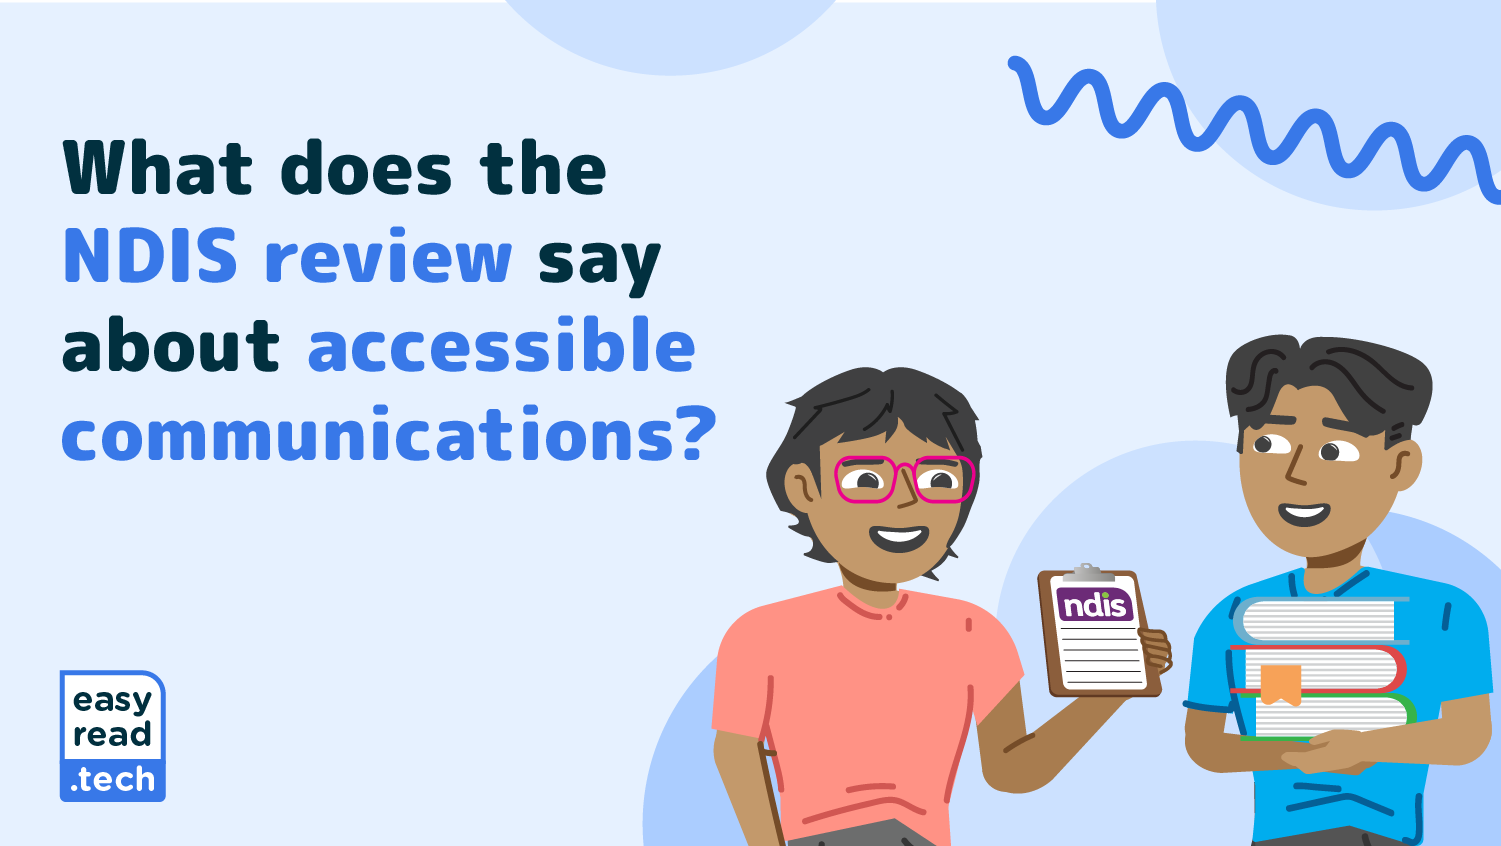 What does the NDIS review say about accessible communications?